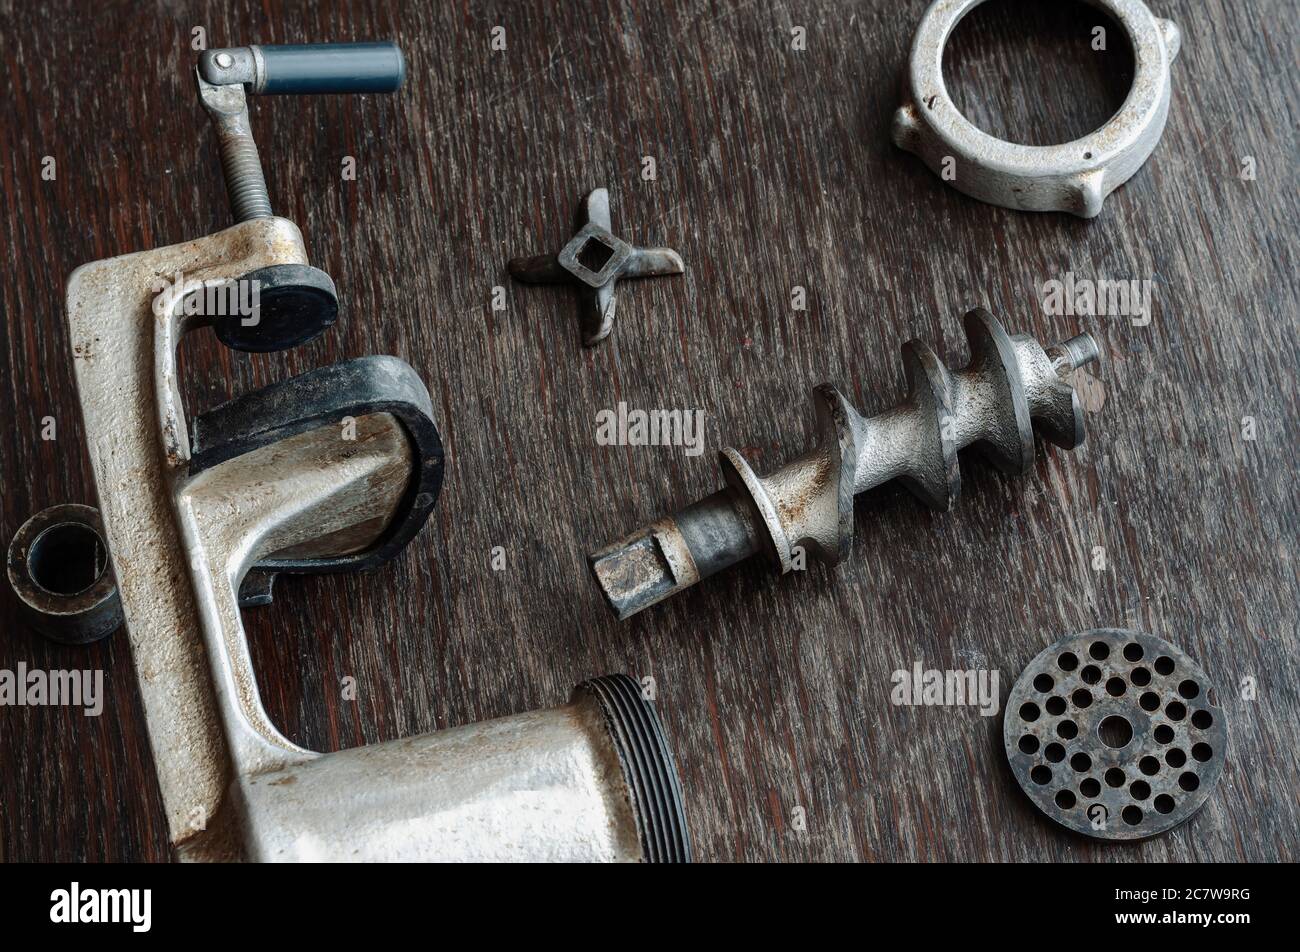 https://c8.alamy.com/comp/2C7W9RG/disassembled-manual-vintage-meat-grinder-on-wooden-table-cast-iron-body-of-meat-grinder-auger-grate-special-knife-and-nut-shooting-from-above-at-2C7W9RG.jpg